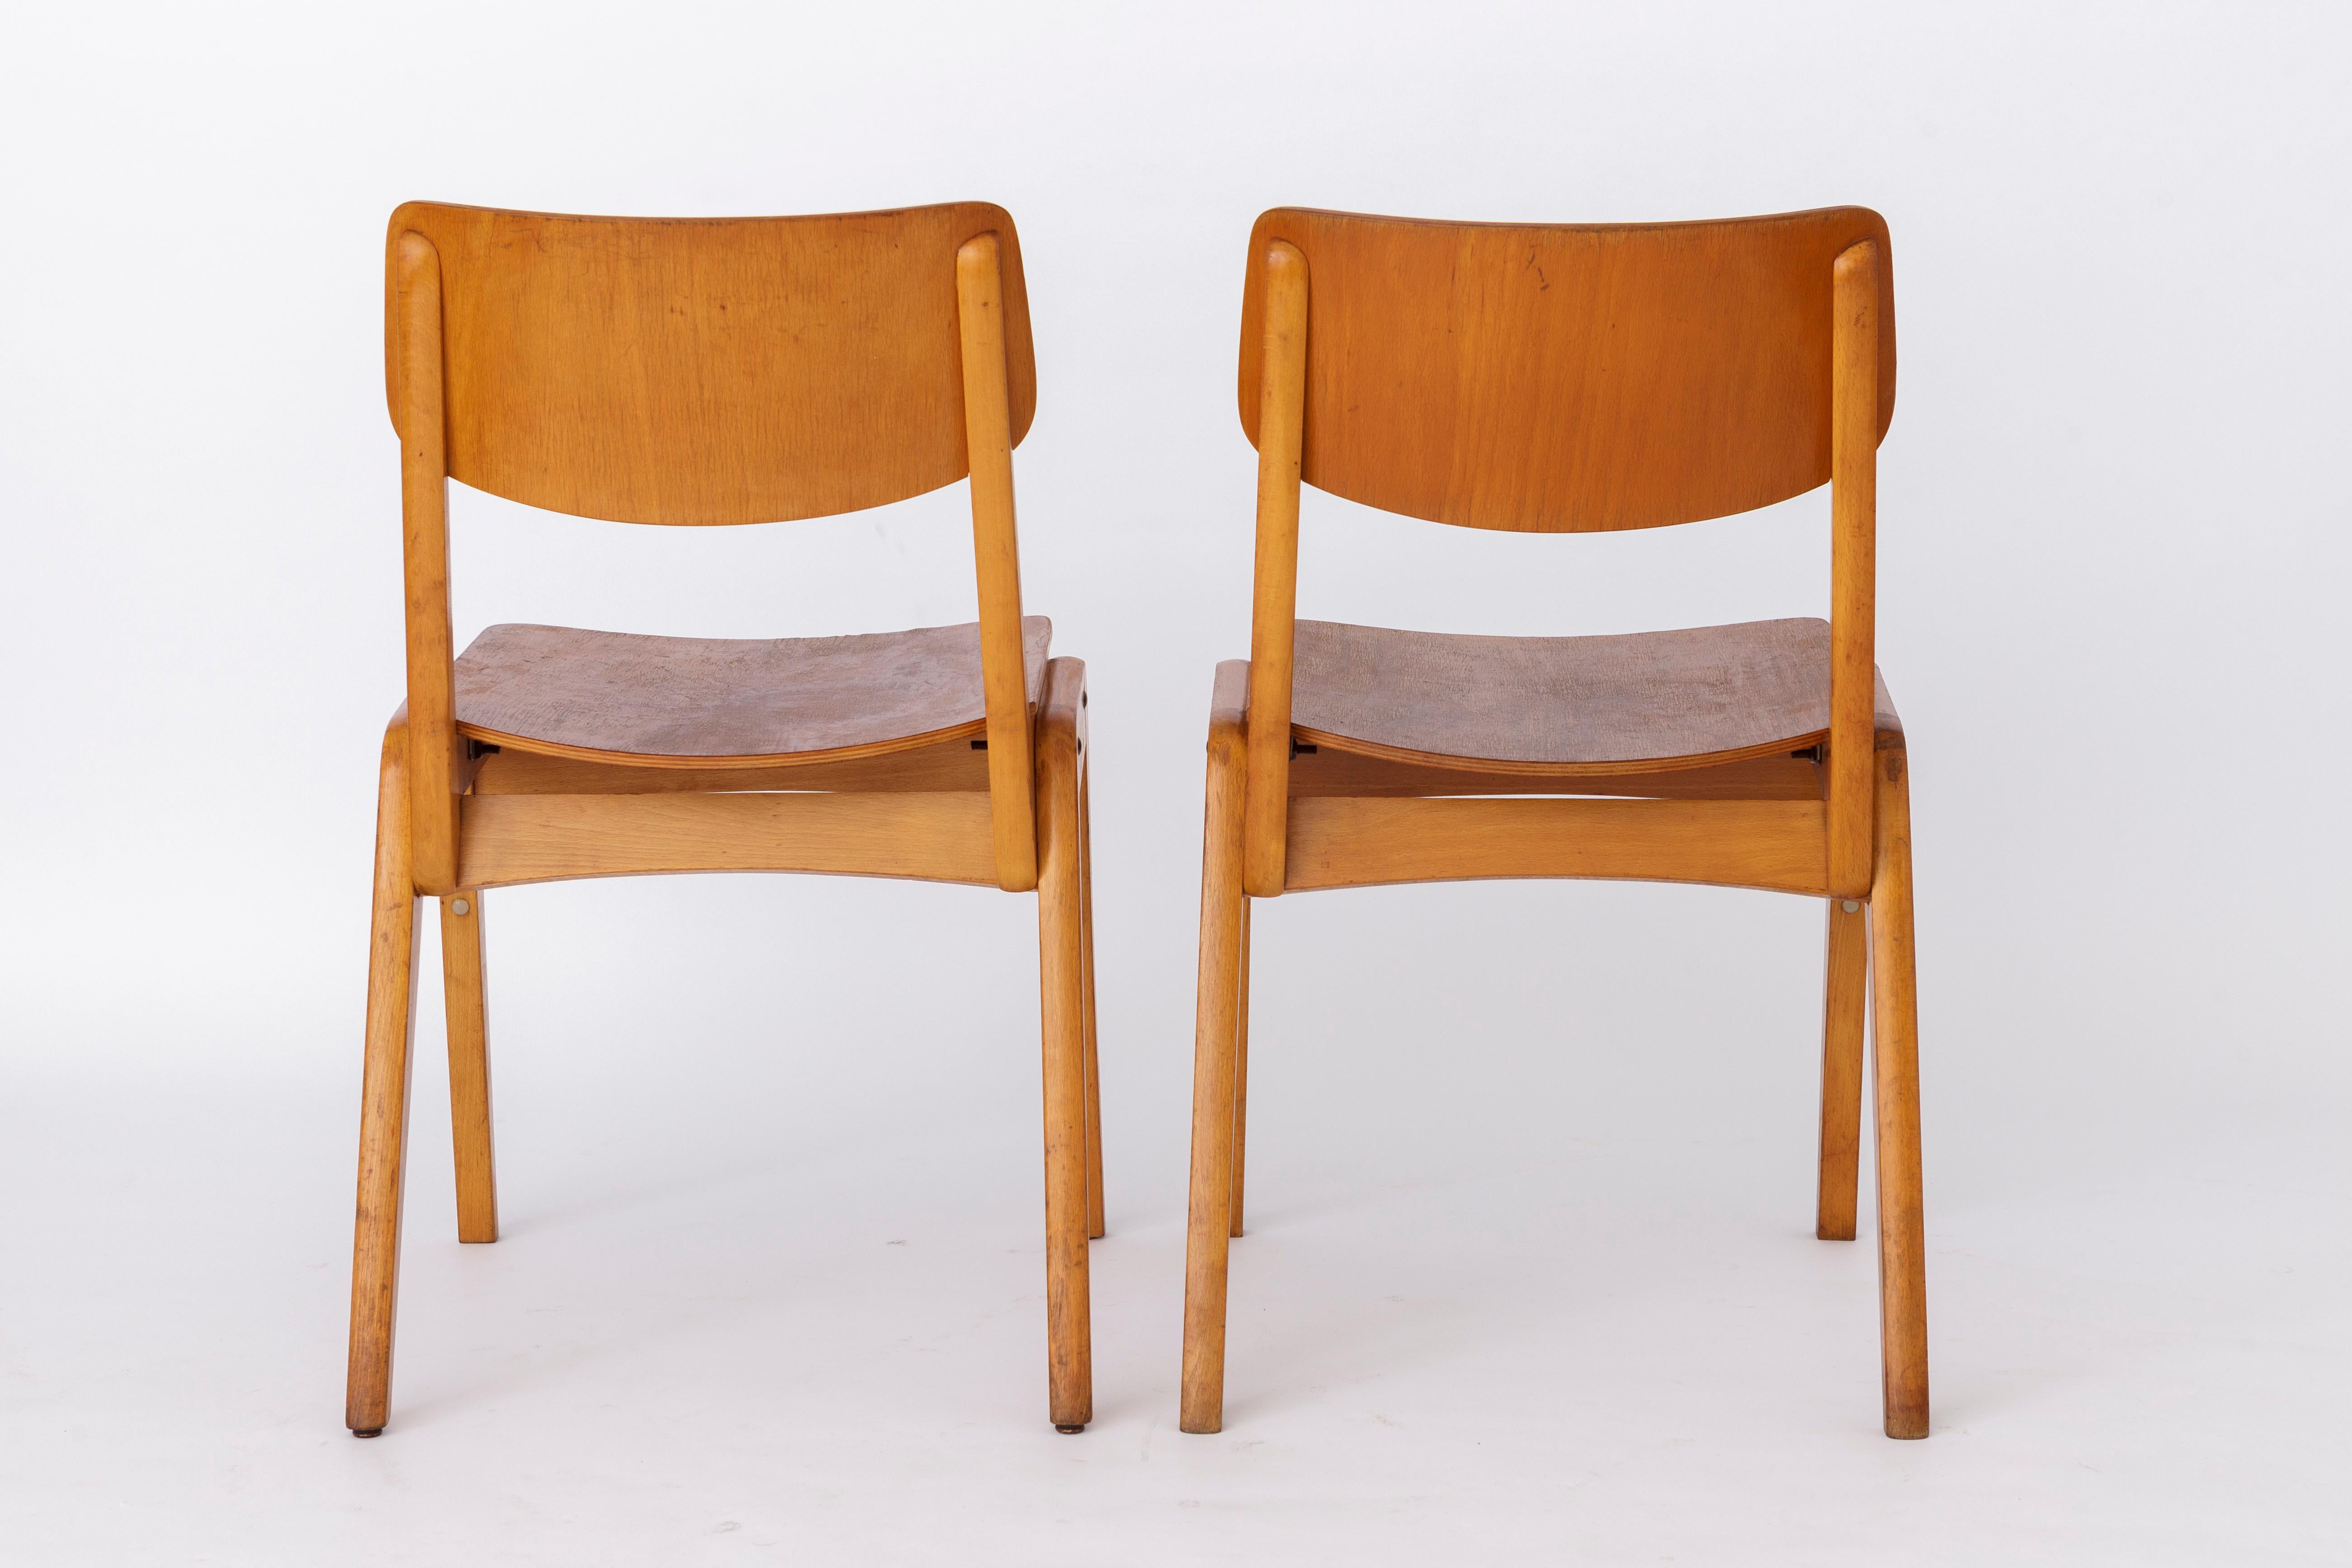 Pair Retro Chairs, 1950s-1960s Vintage Germany In Good Condition For Sale In Hannover, DE